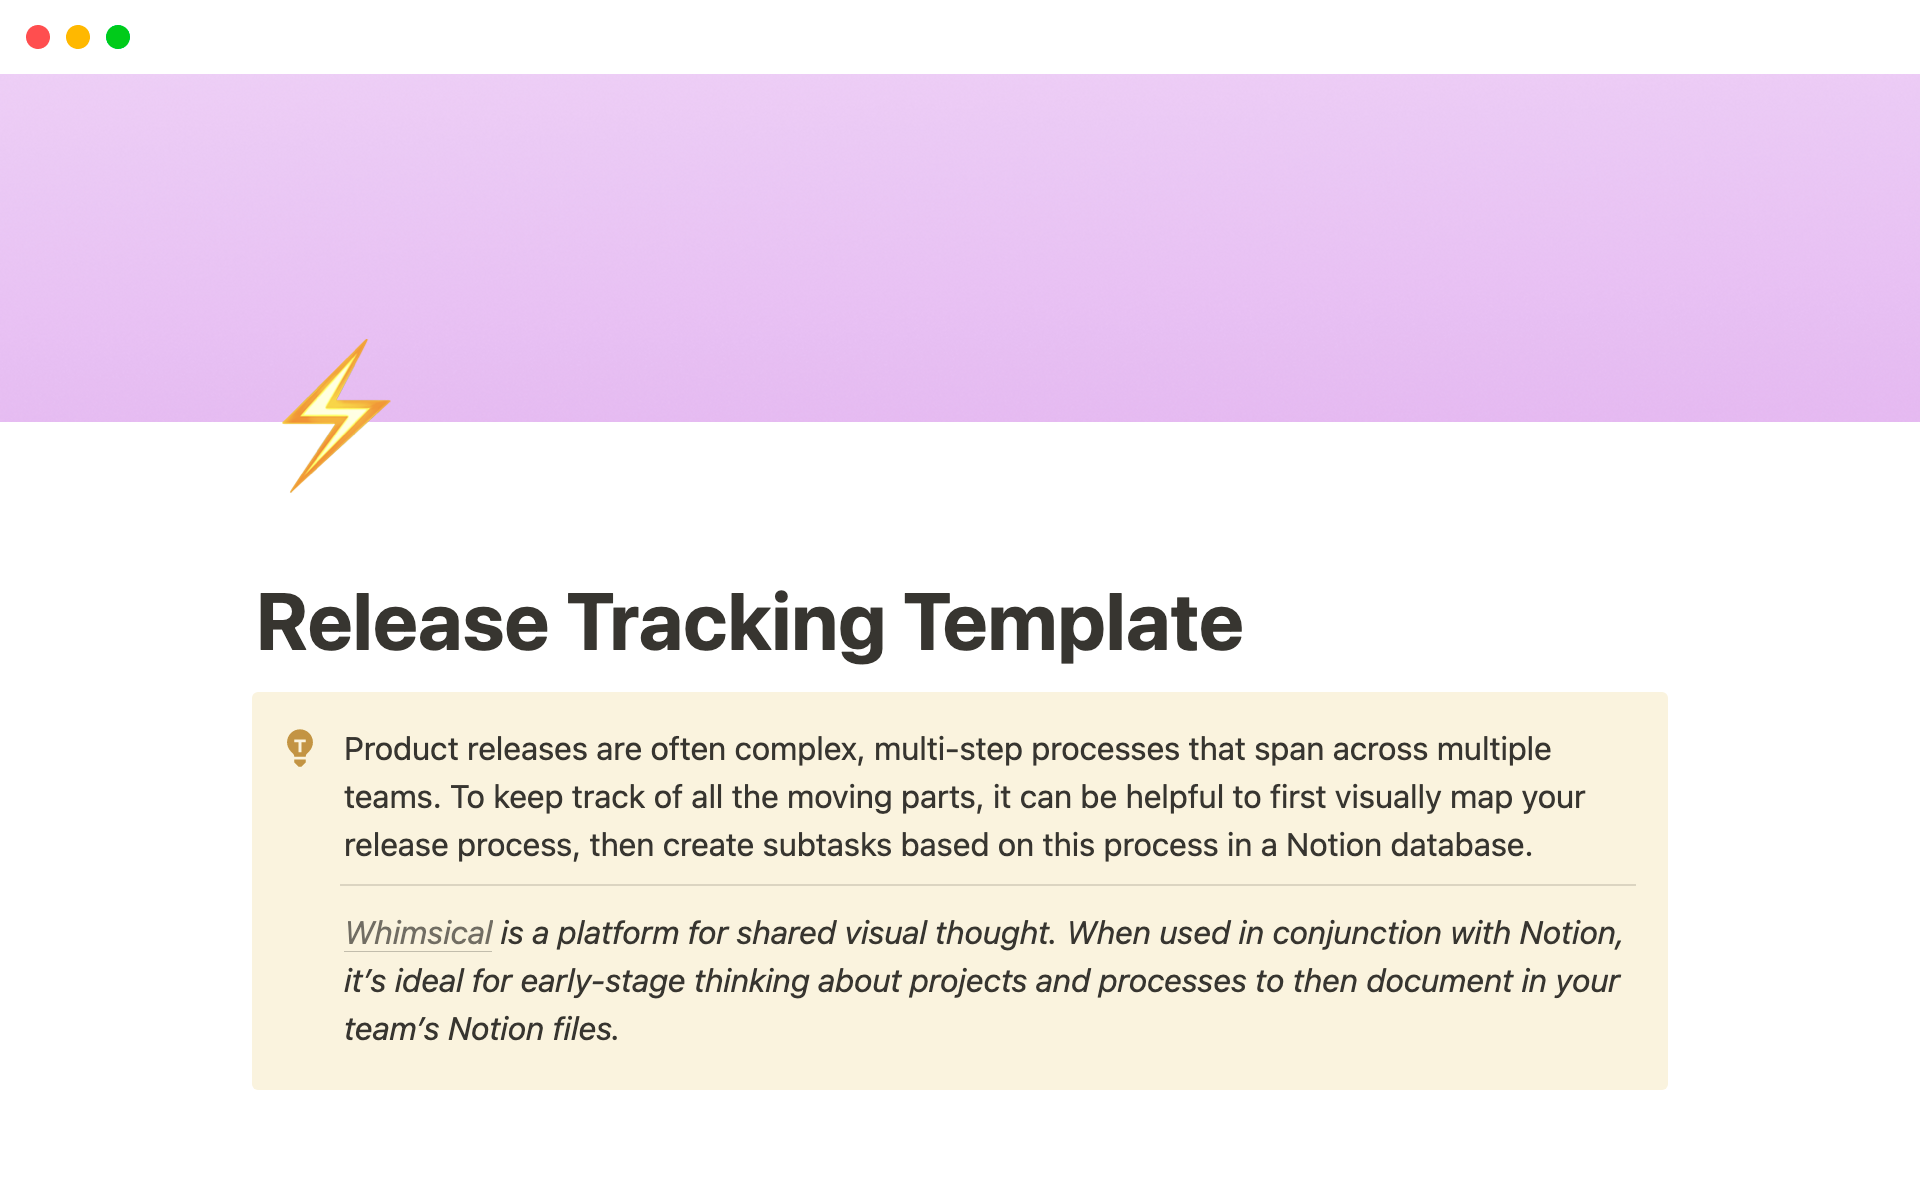 The release tracking template organizes all the moving parts of your launch with a visual map of your release process as well as created subtasks in Notion.